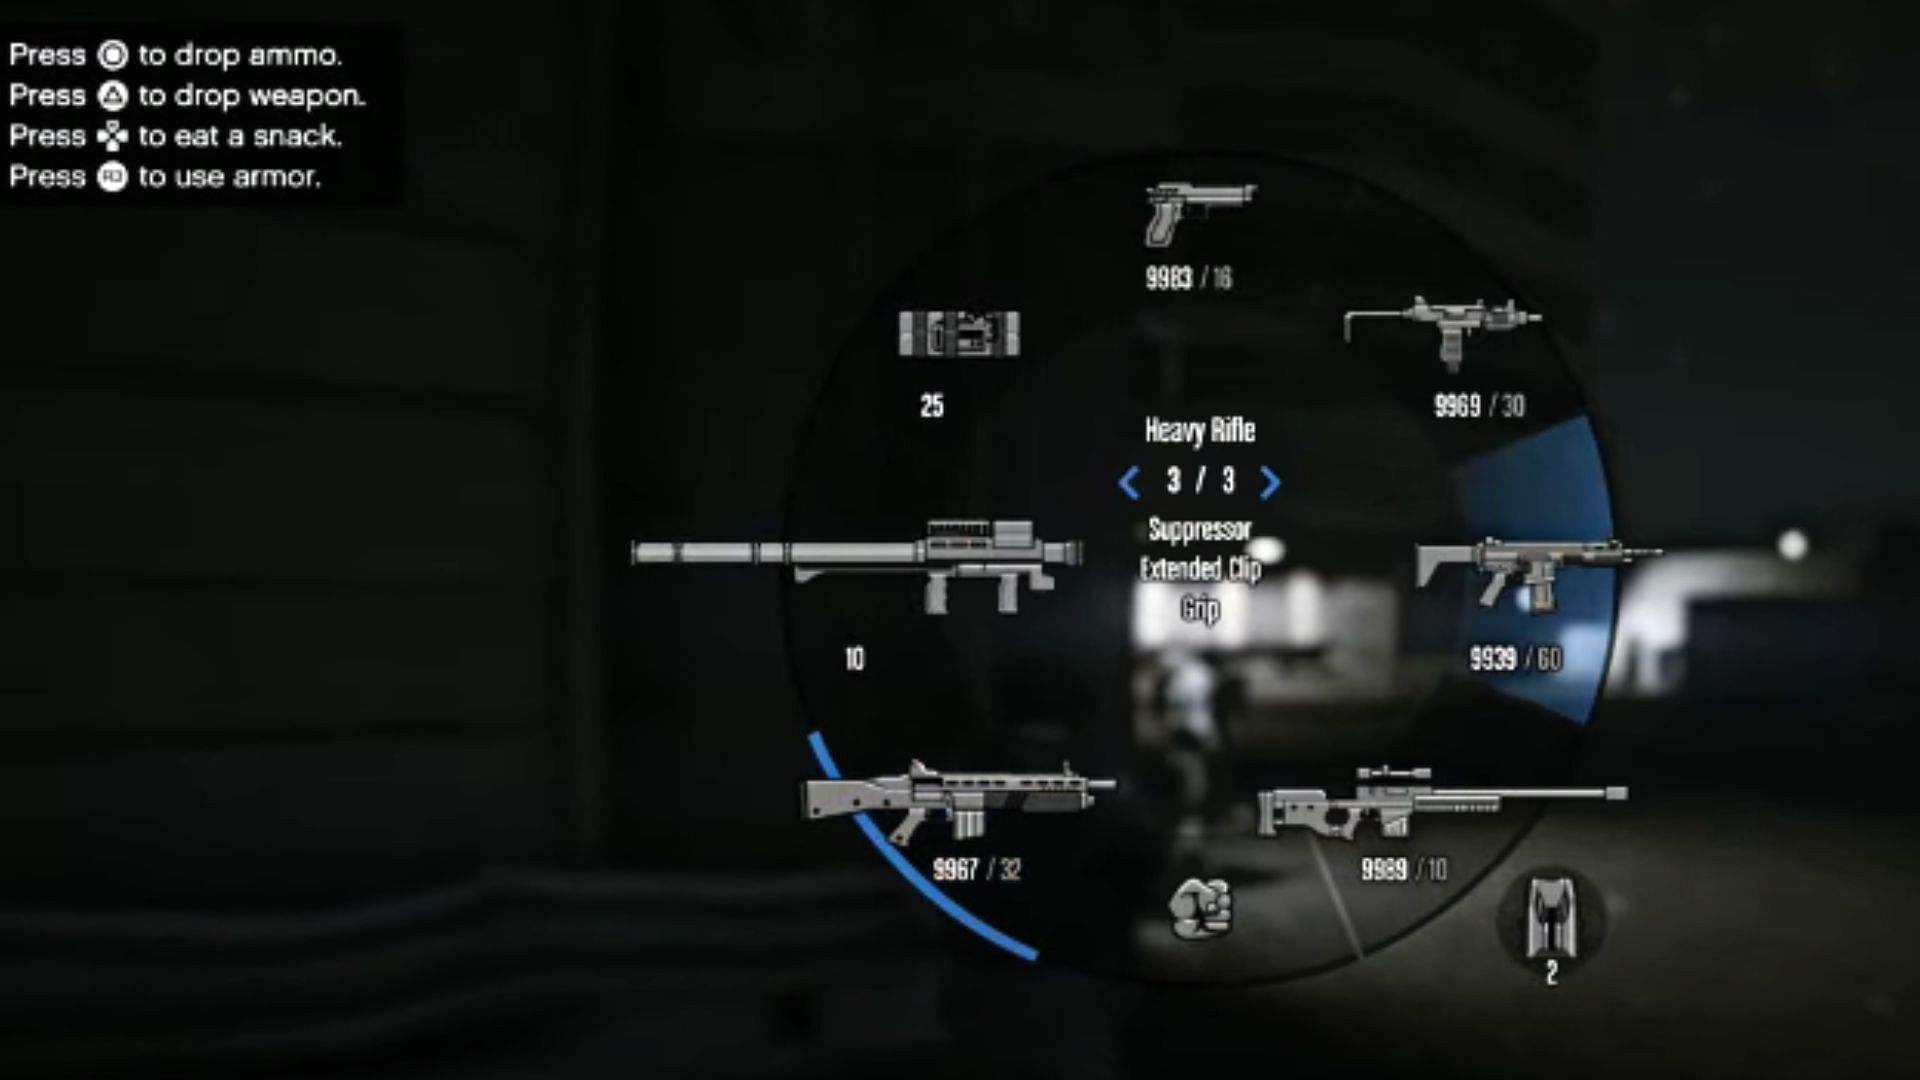 Suppressed weapons are recommended for this mission (Image via YouTube/TGG)